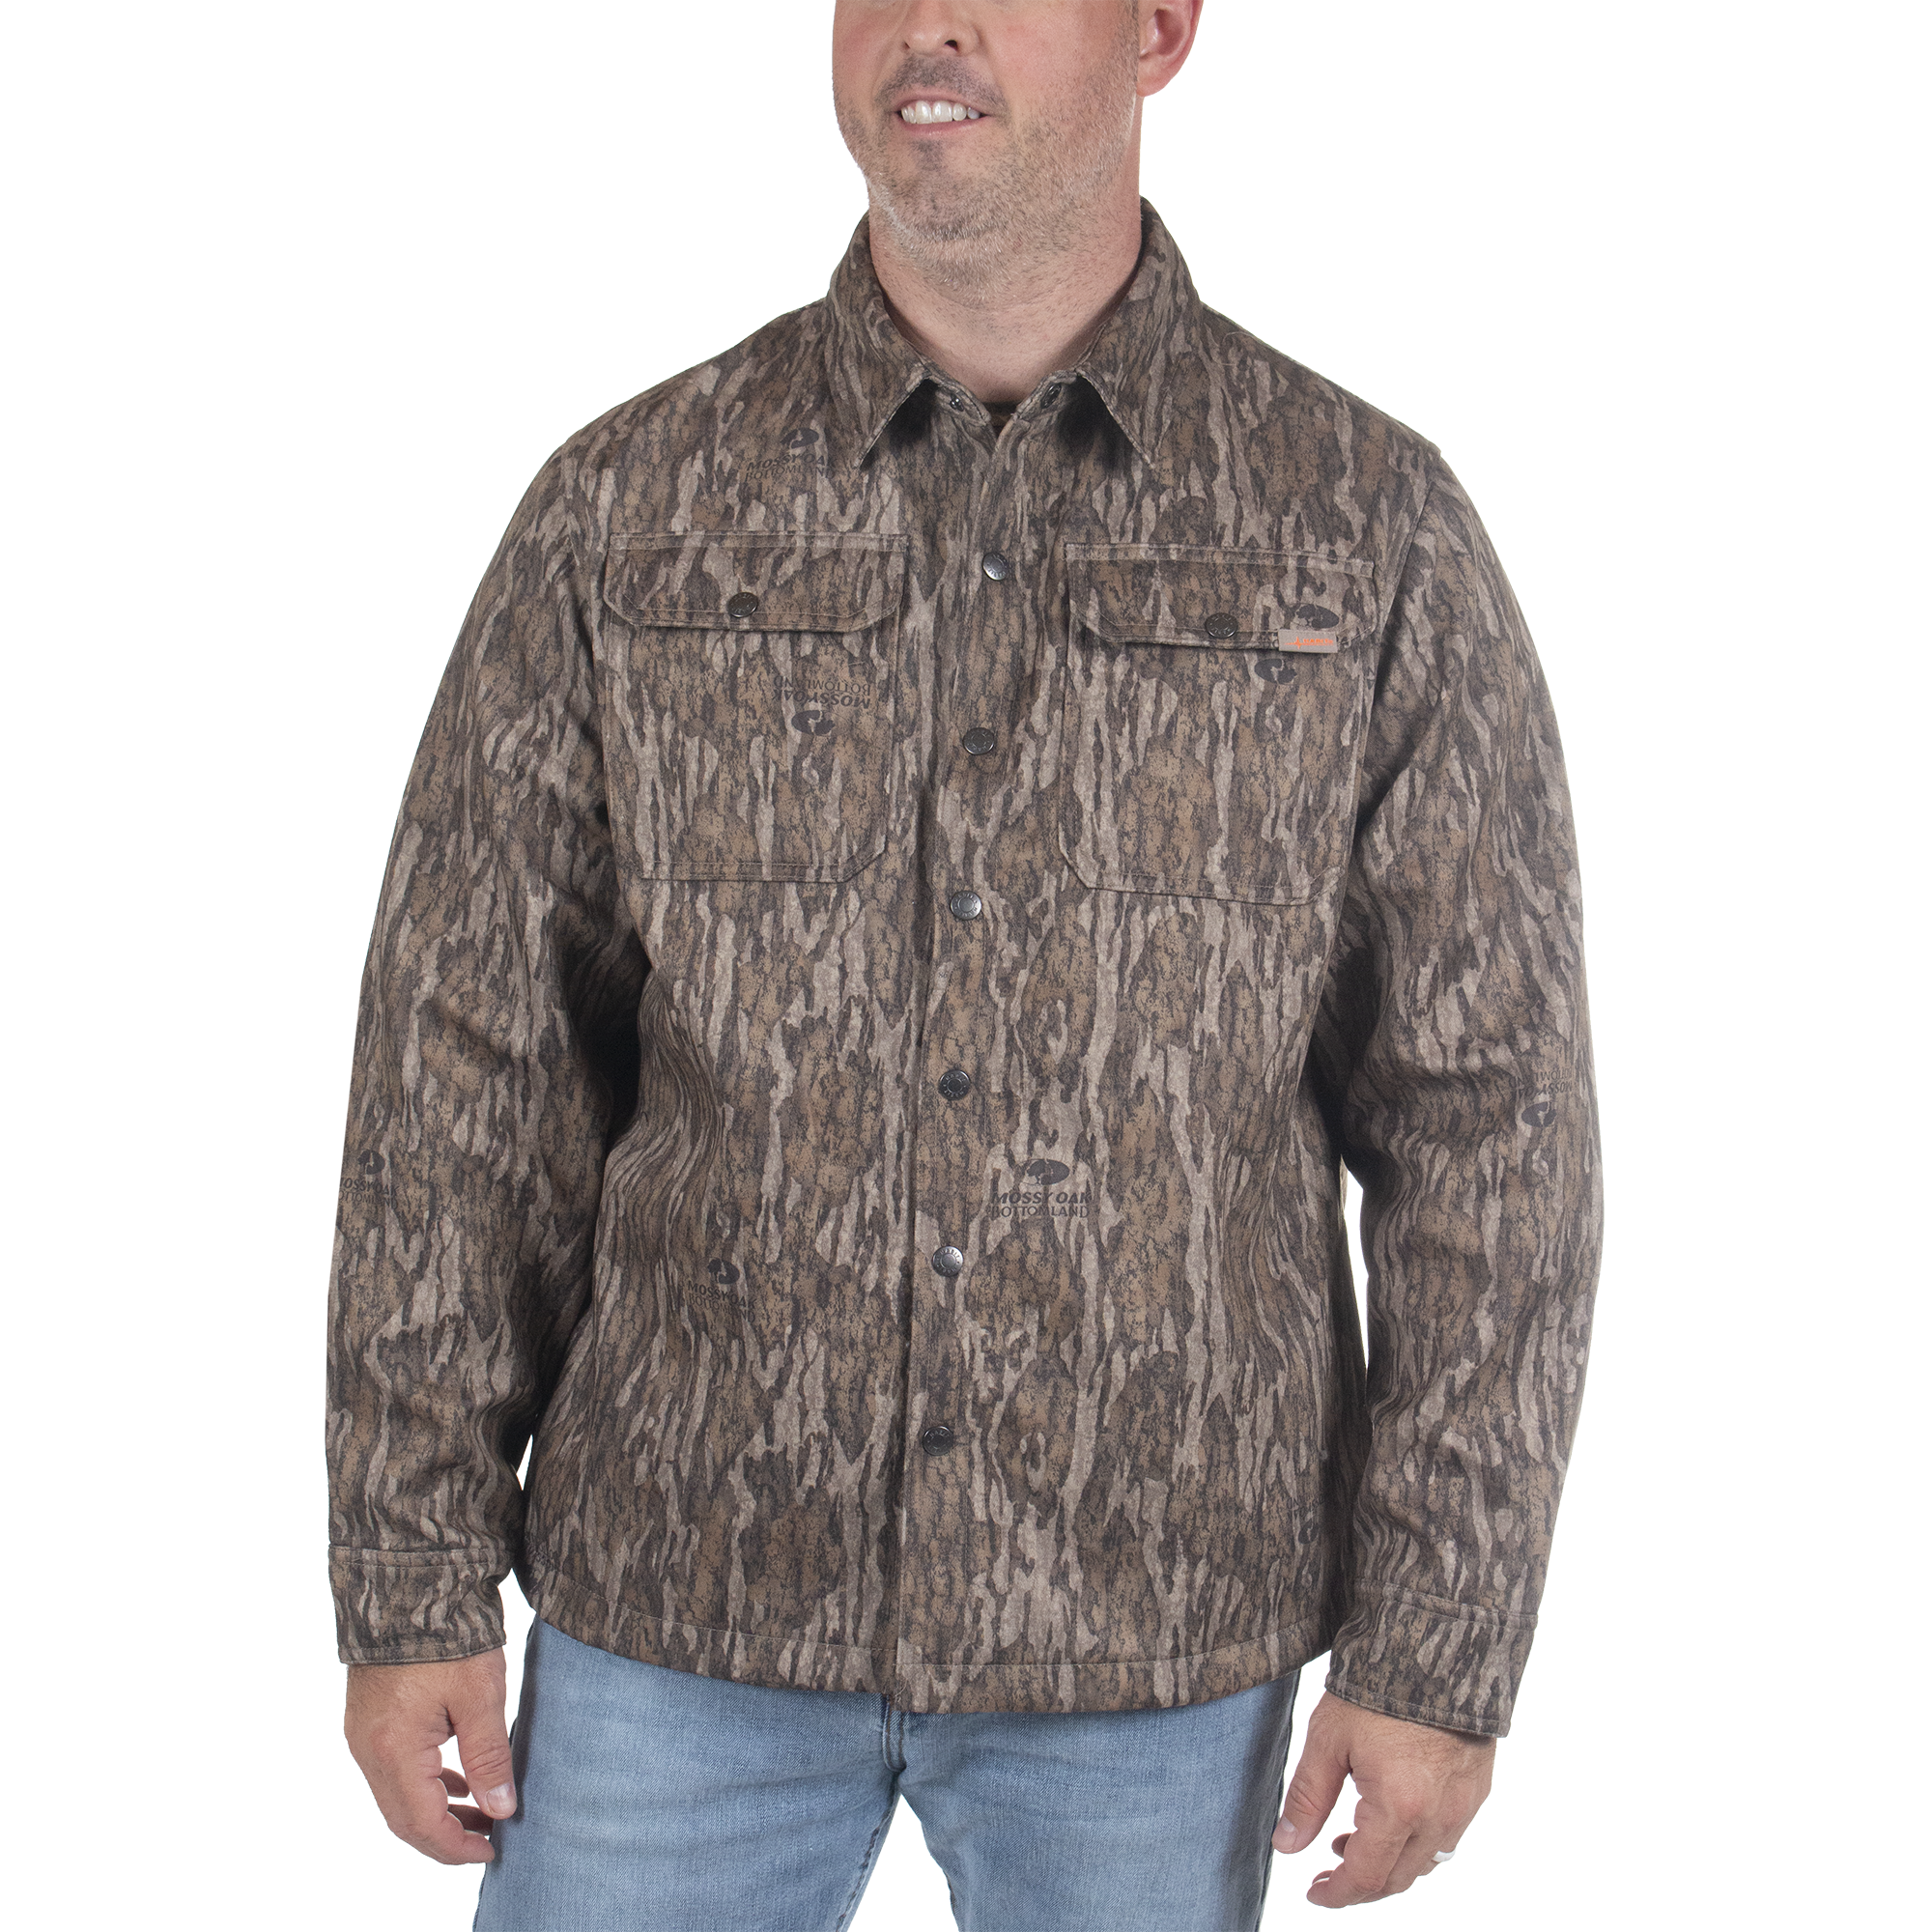 Men's Bowslayer Shirt Jacket Mossy Oak New Bottomland front on model view